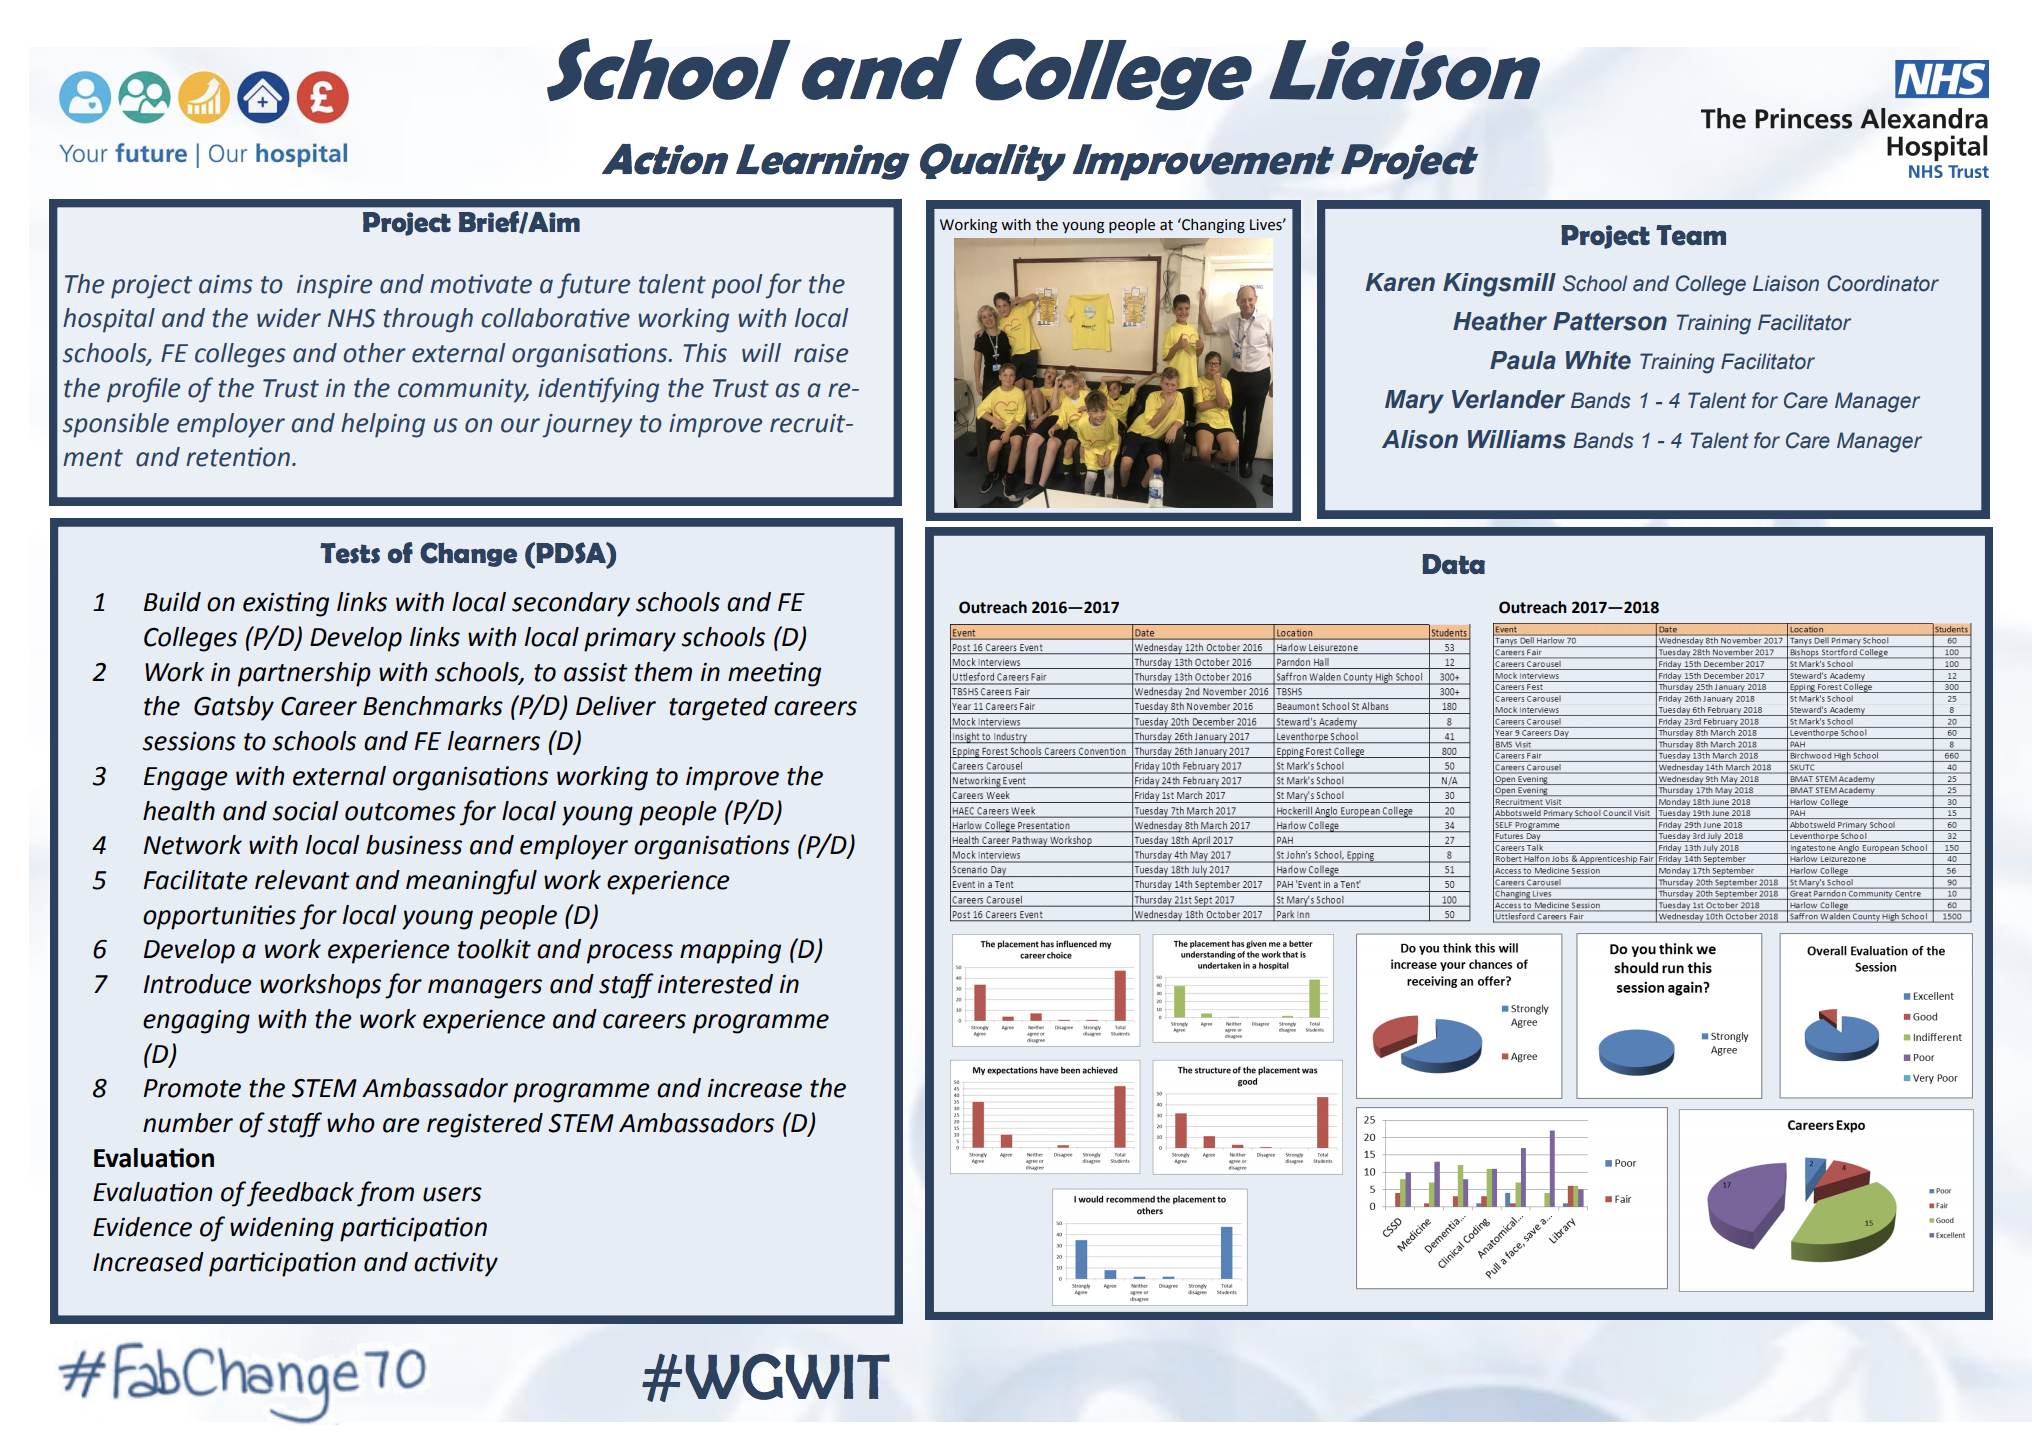 PAHT - School and College Liaison Action Learning Quality Improvement Project featured image